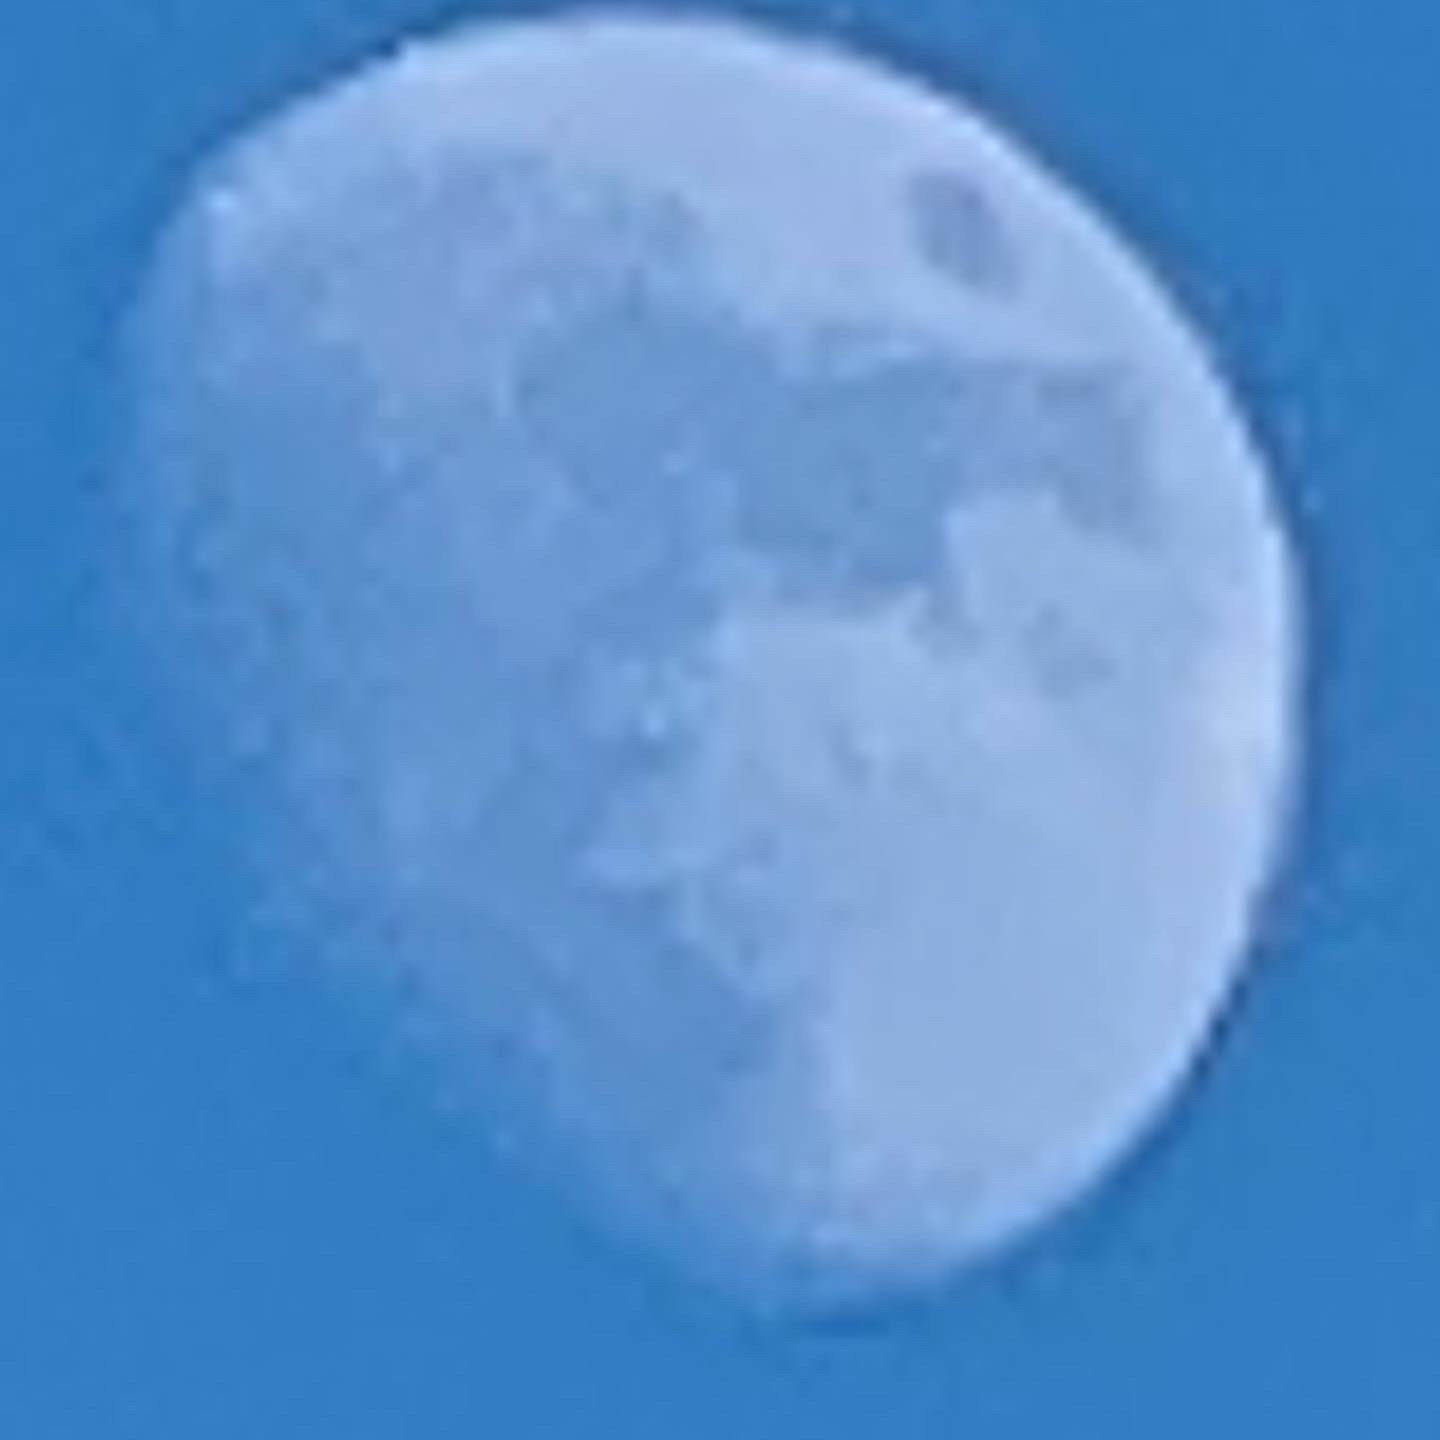 Cow Jumping Over the Moon- September 6, 2022